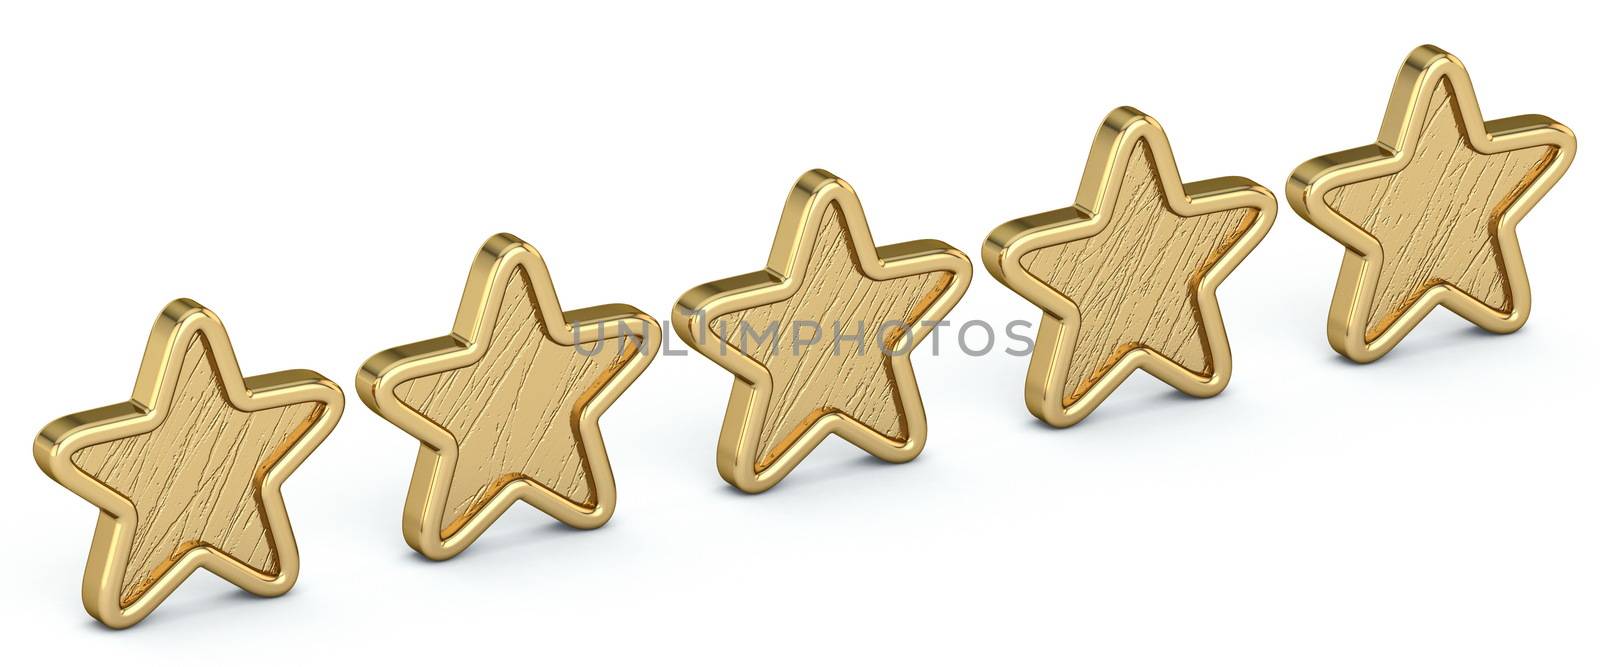 Voting concept rating FIVE golden stars 3D by djmilic